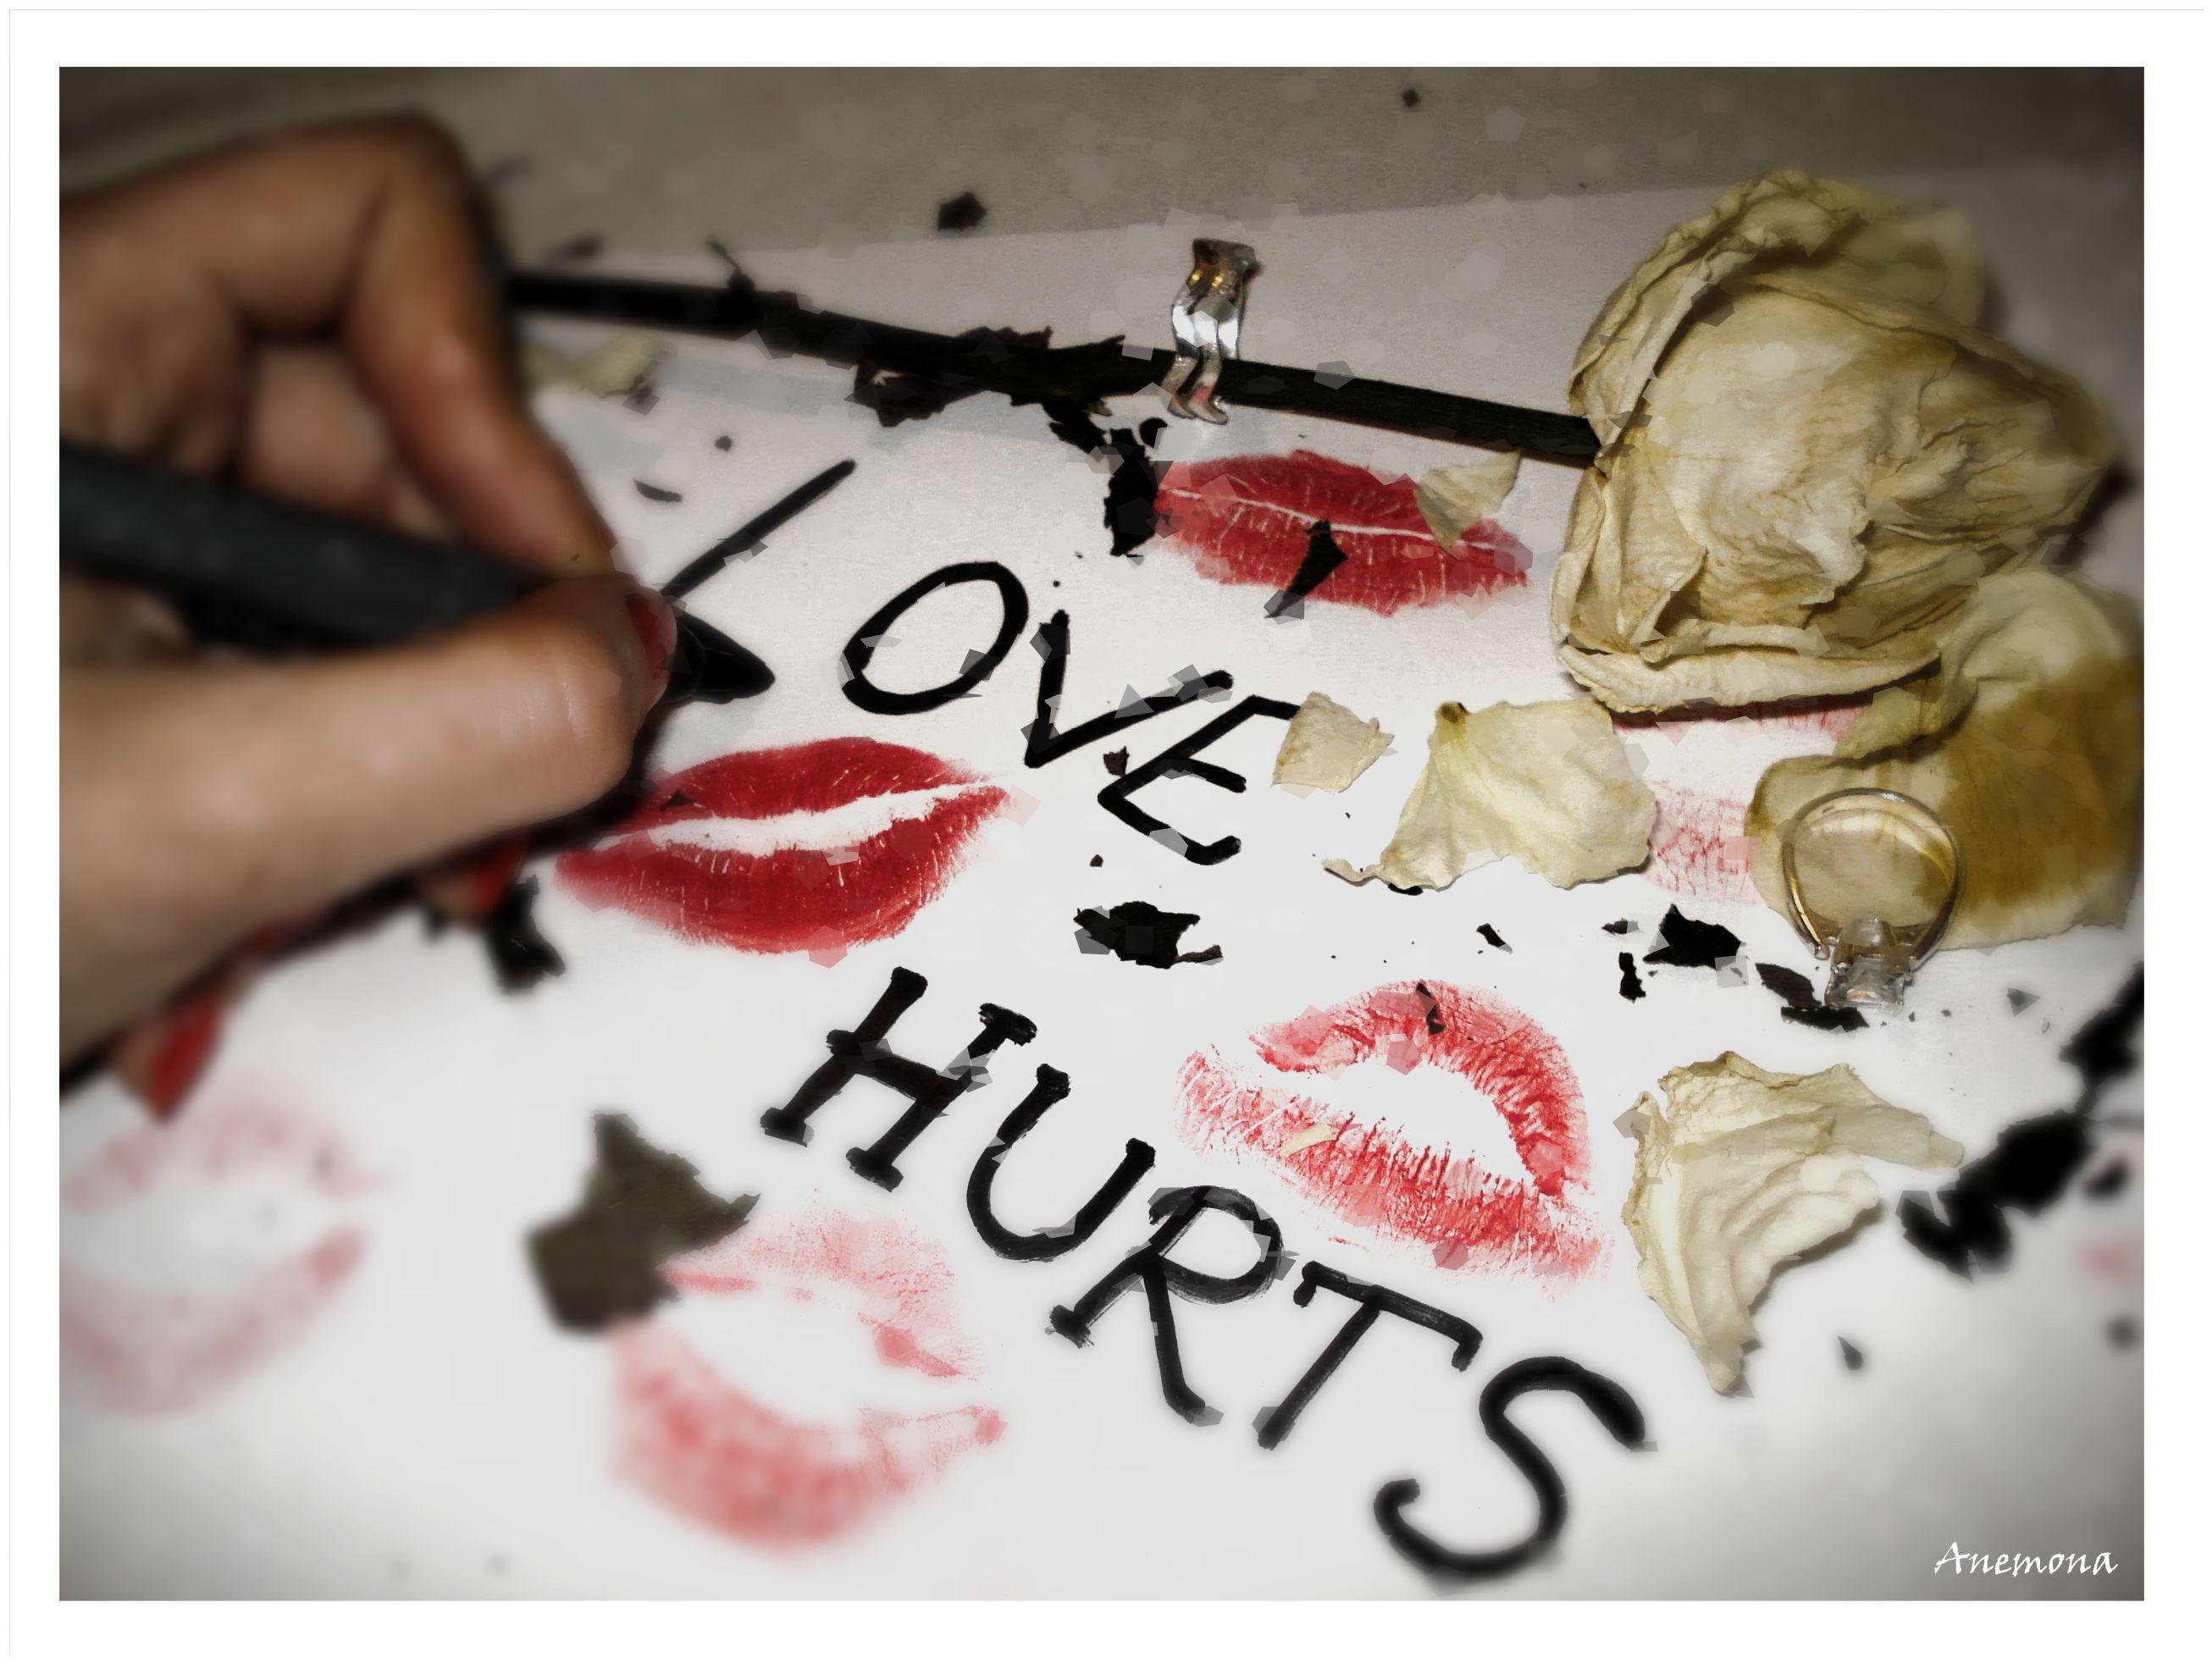 Free Love Hurts Wallpapers - Wallpaper Cave